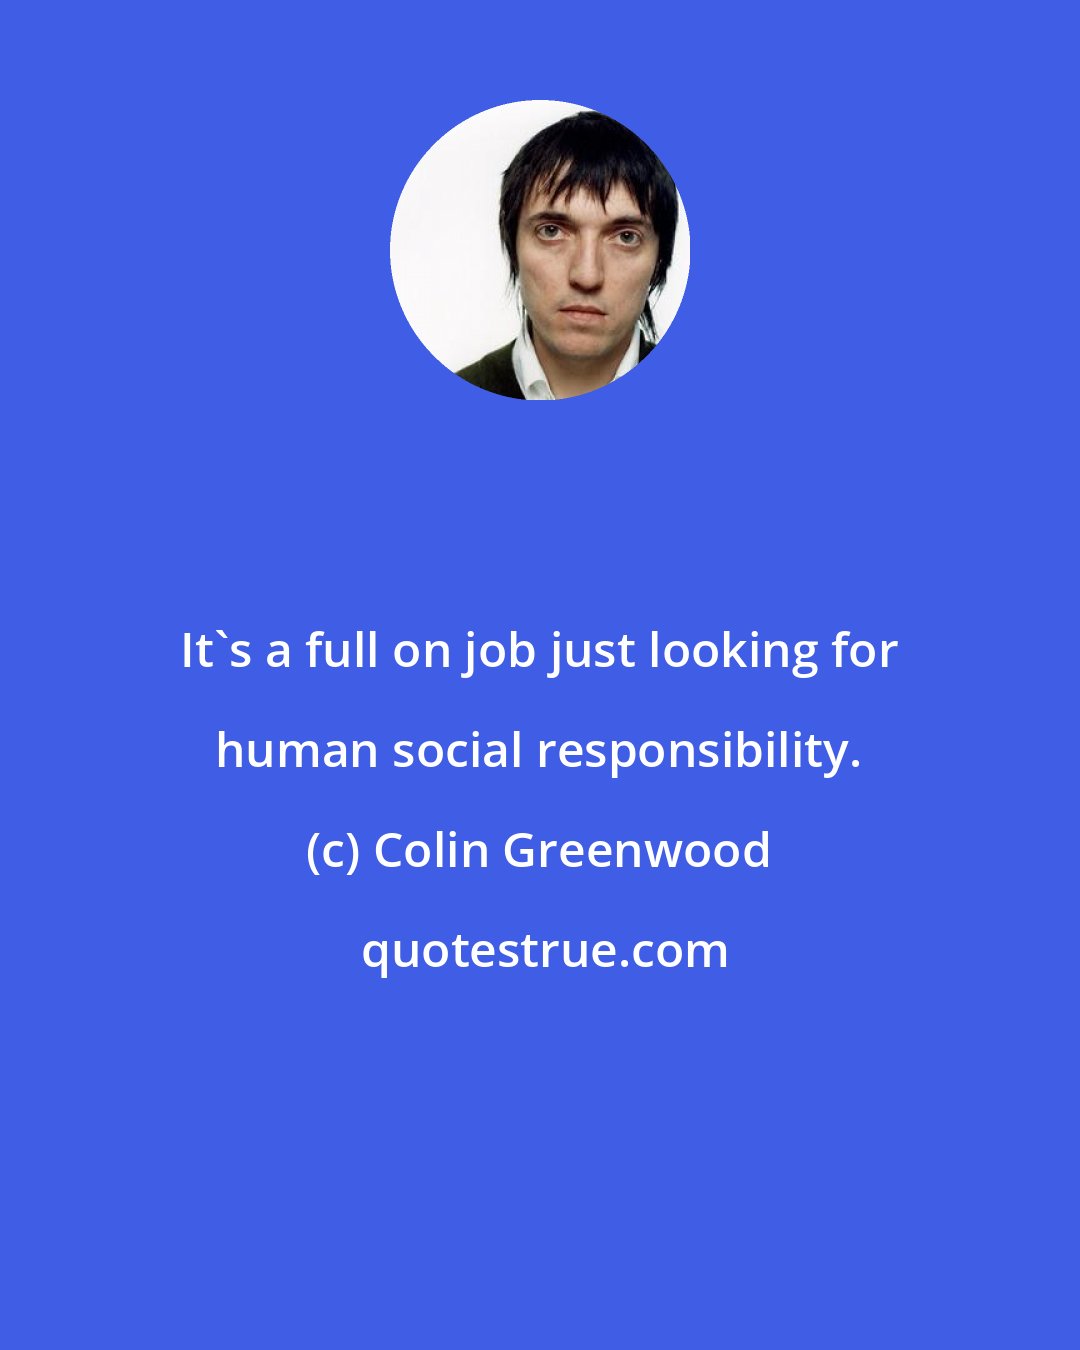 Colin Greenwood: It's a full on job just looking for human social responsibility.